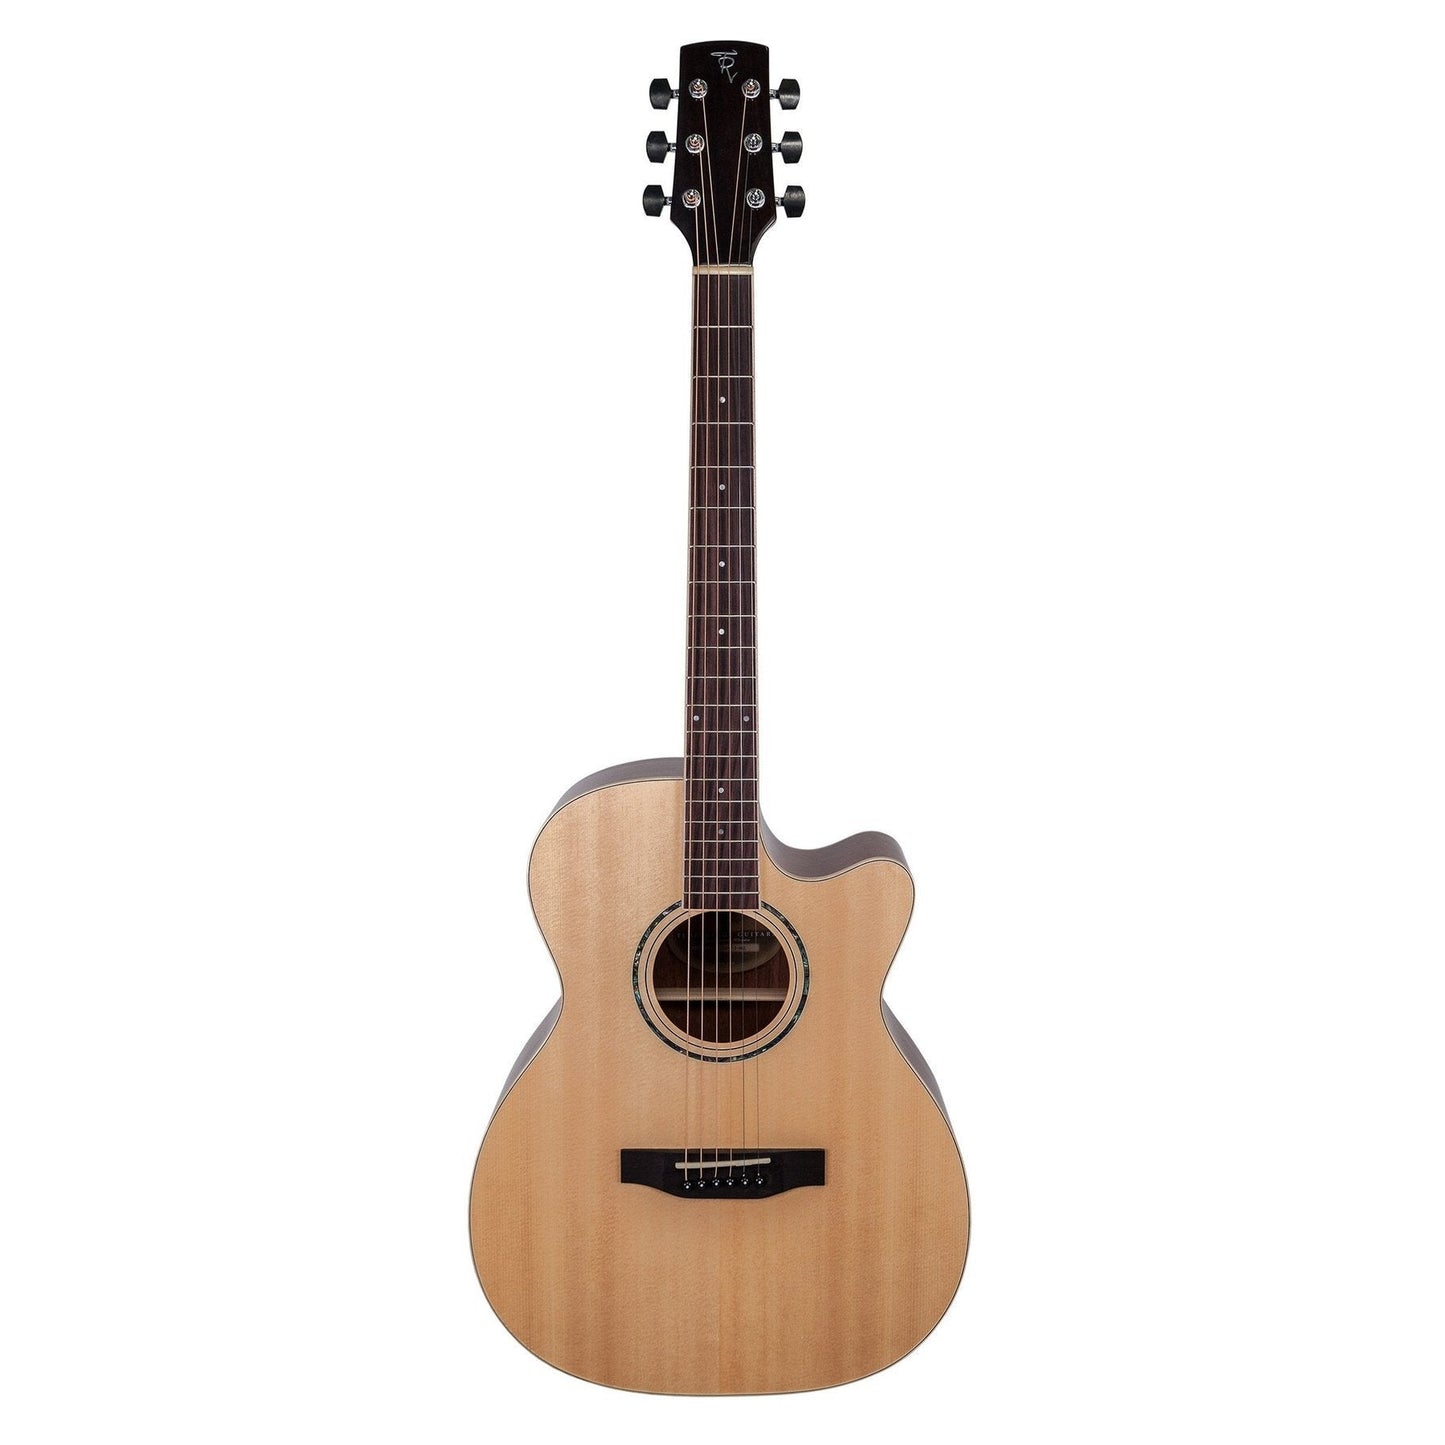 Timberidge '1 Series' Spruce Solid Top Acoustic-Electric Small Body Cutaway Guitar (Natural Gloss)